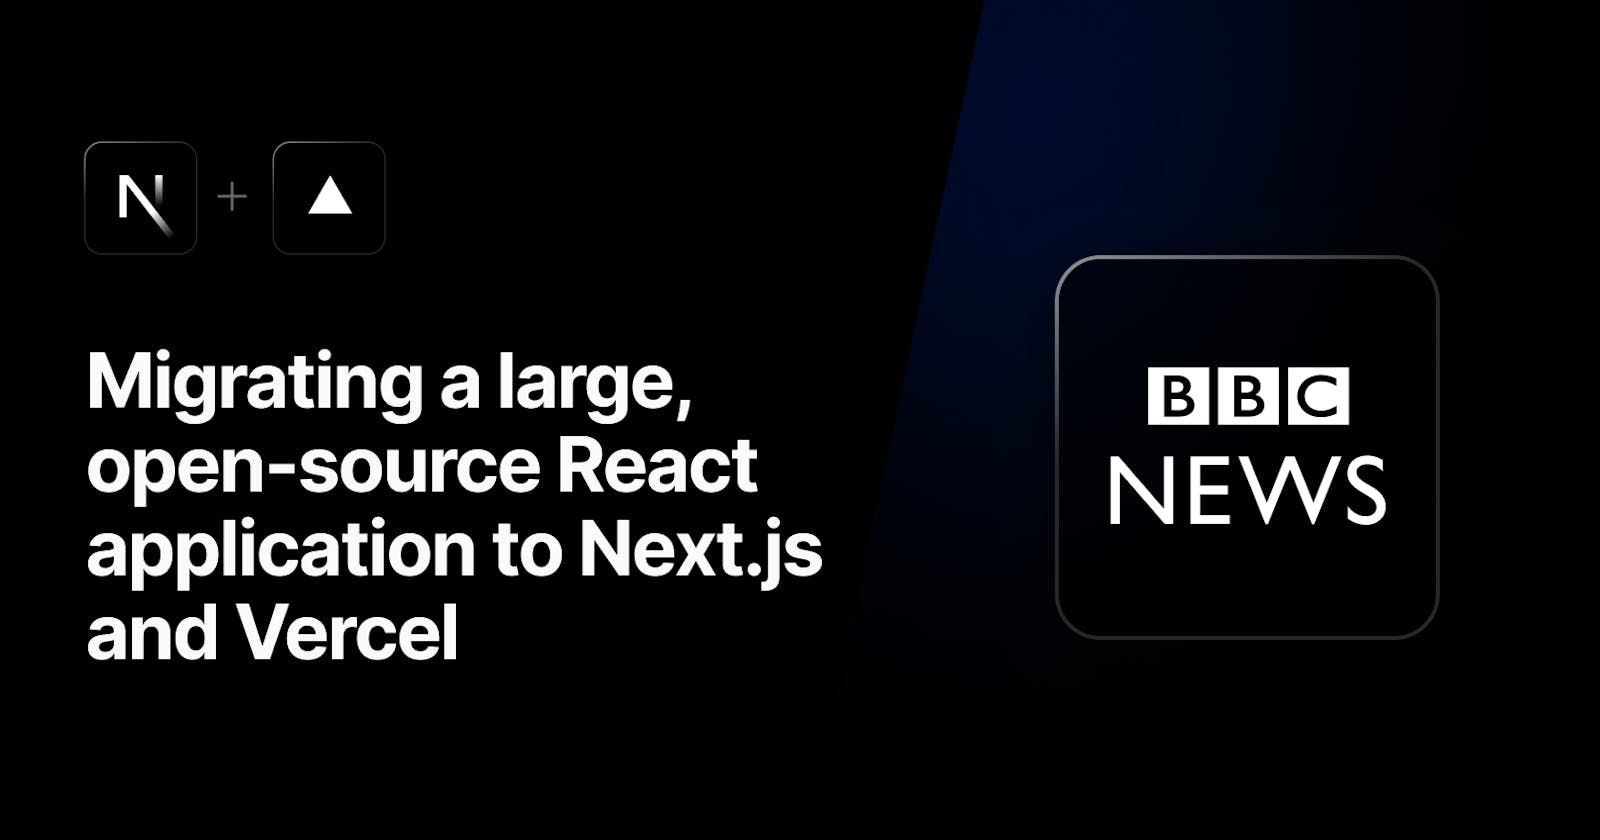 Migrating a large, open-source React application to Next.js and Vercel